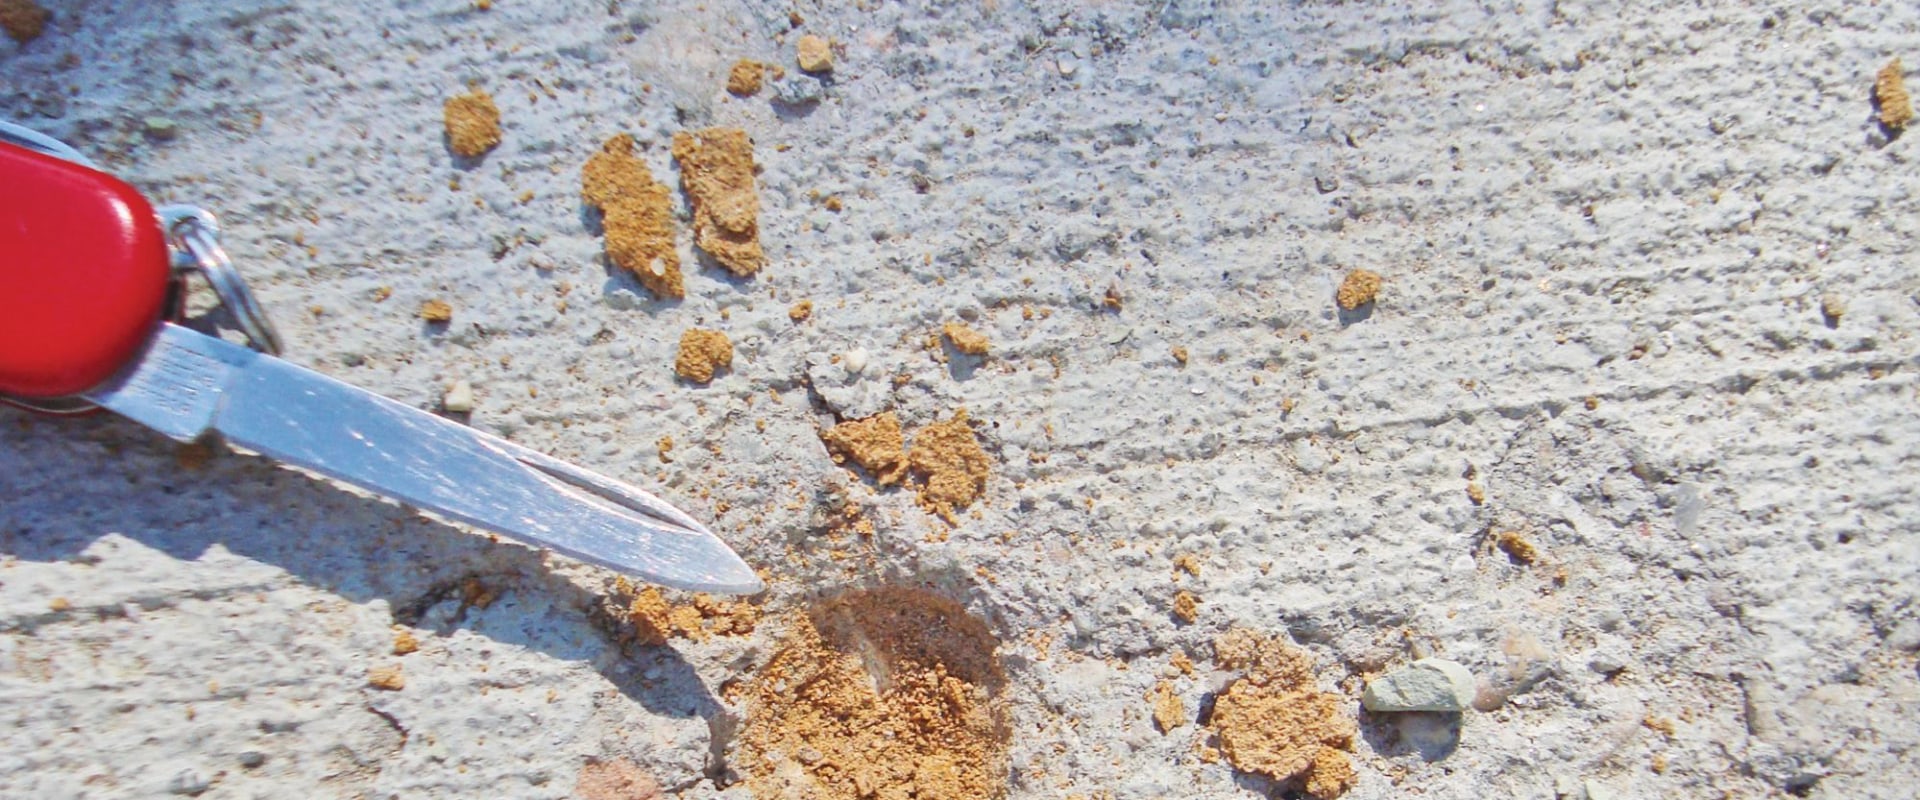 How to Repair Chipping Concrete and Prevent it from Reoccurring